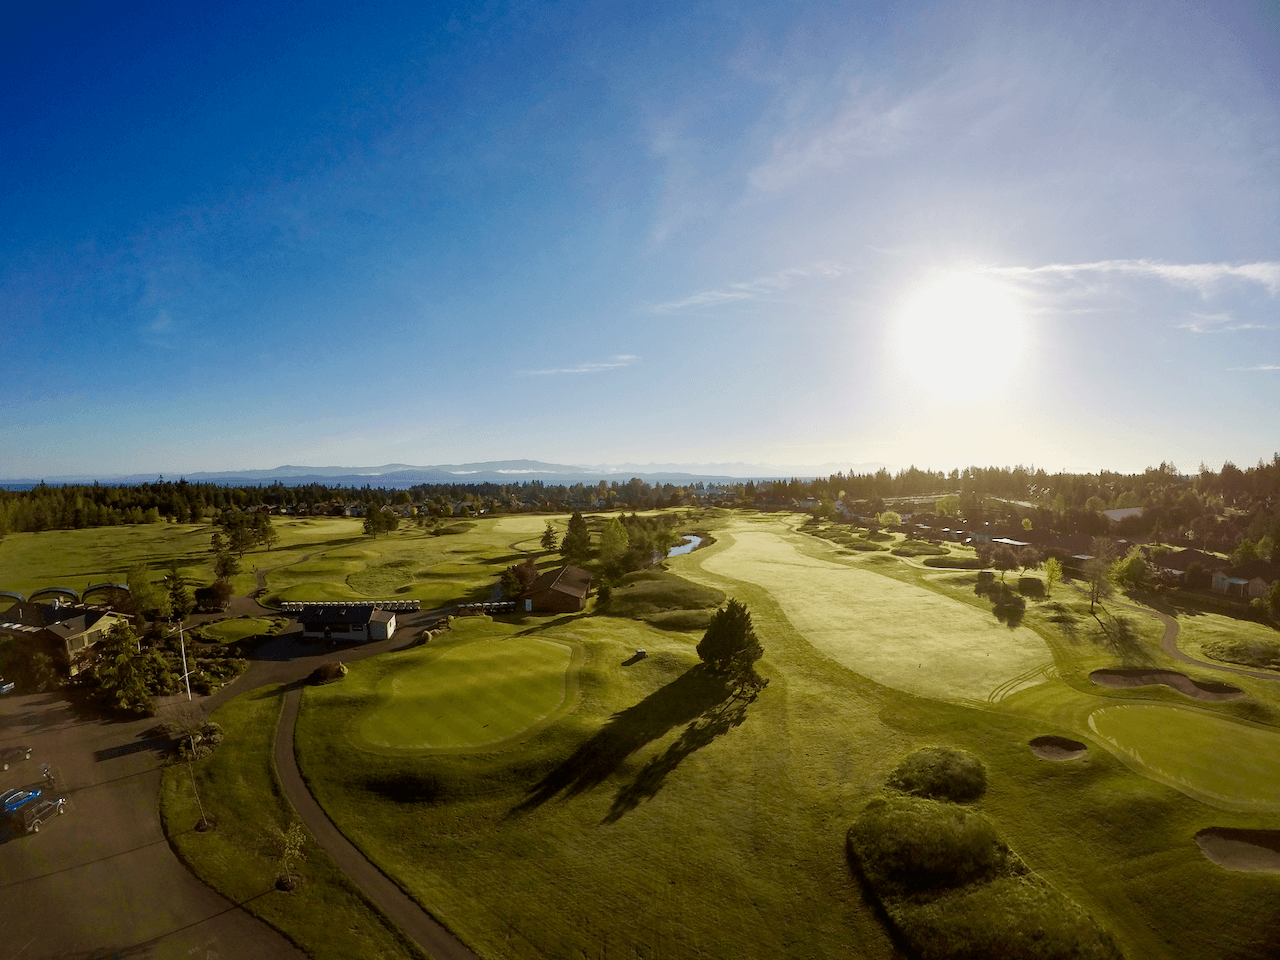 Ariel view of Morningstar golf course at sunrise